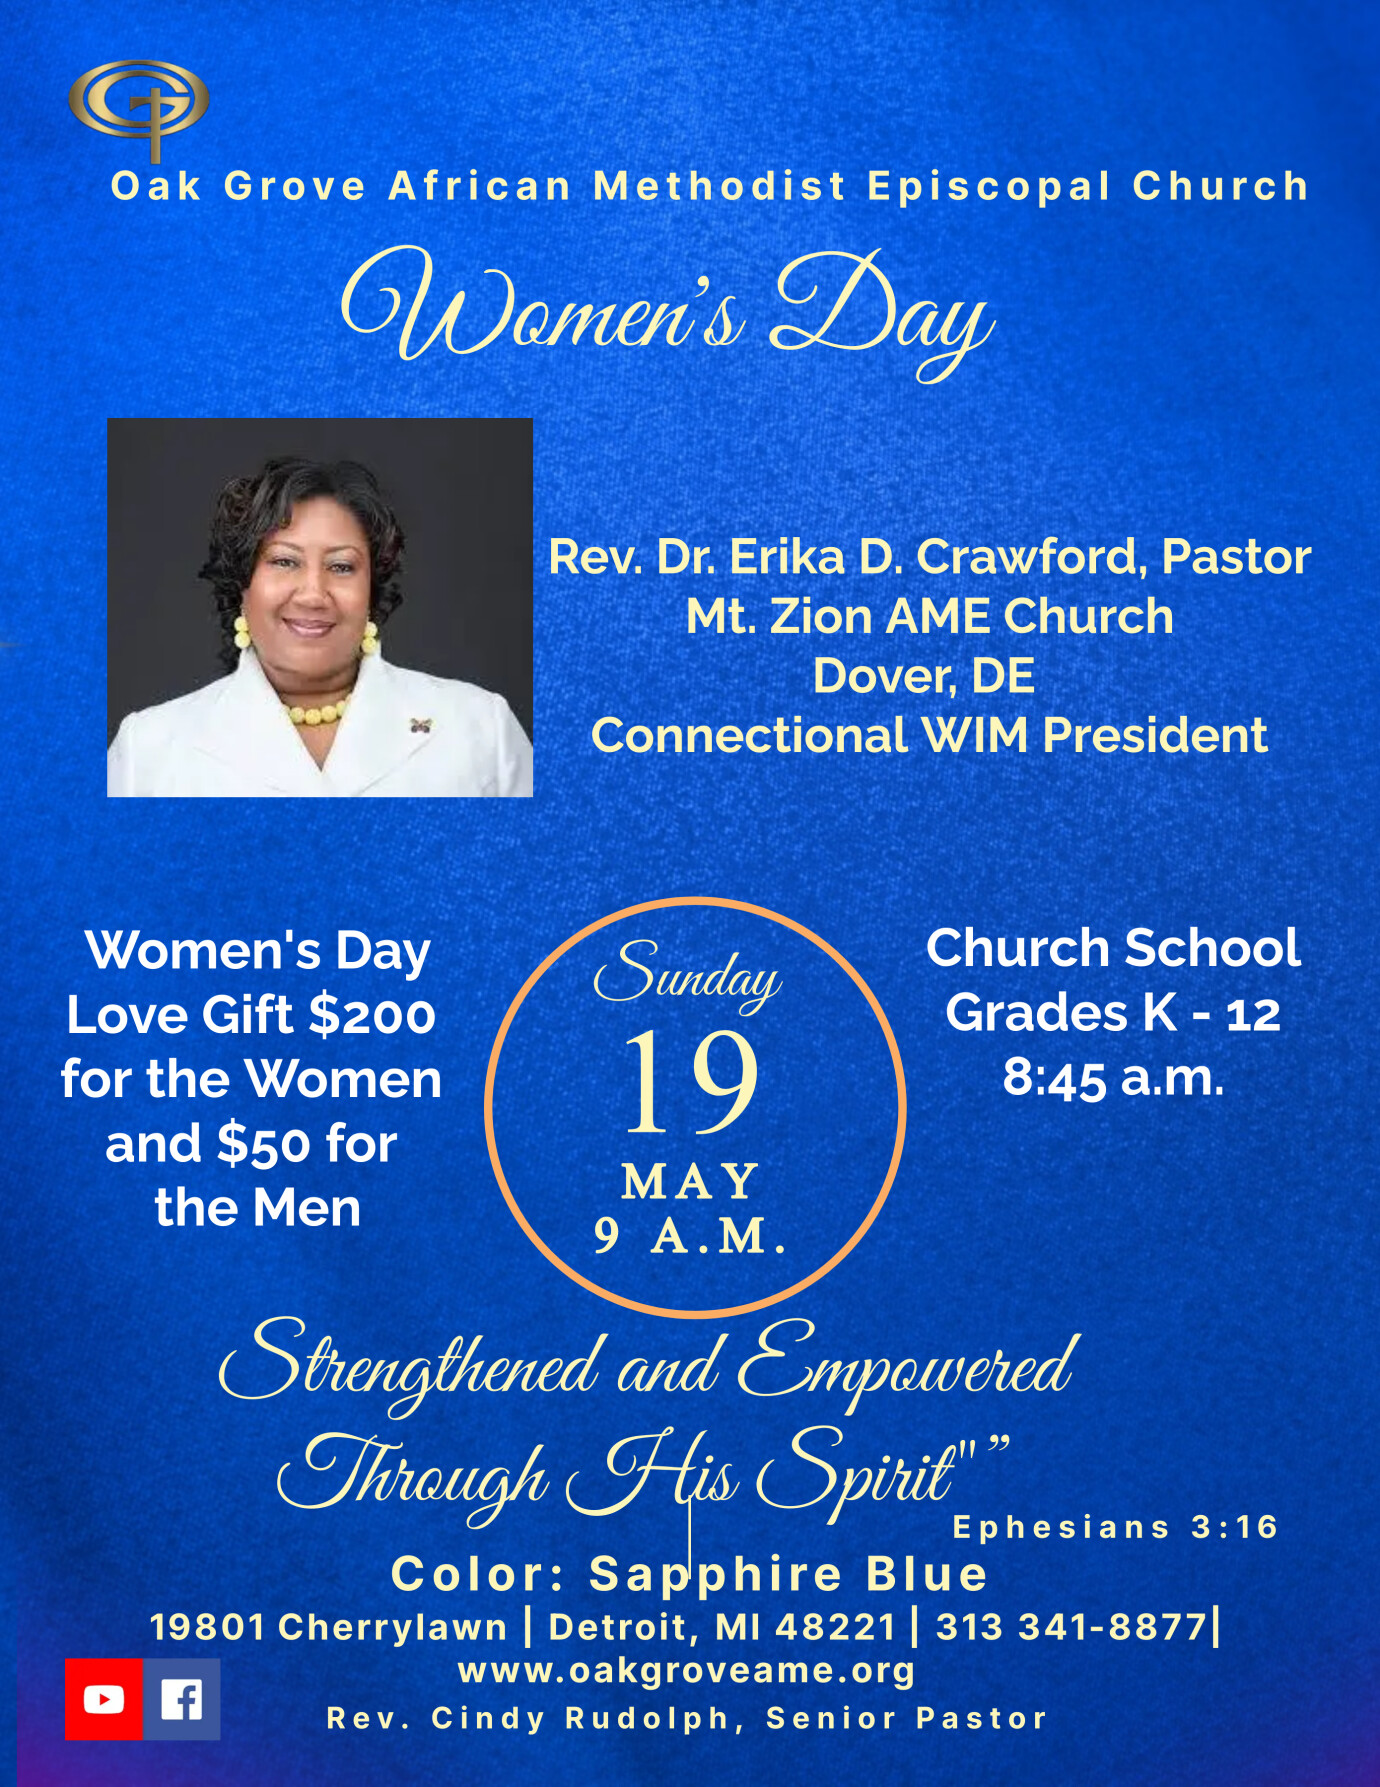 Annual Women's Day Worship Service